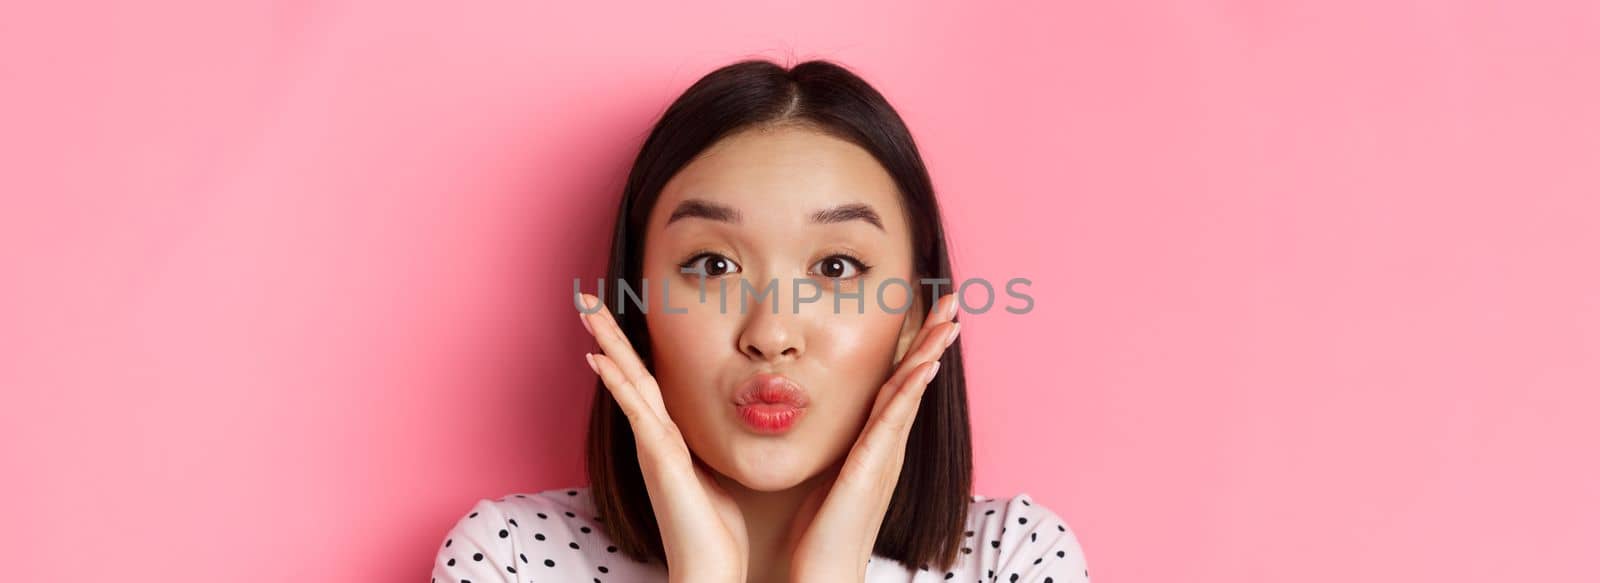 Beauty and lifestyle concept. Close-up of adorable asian woman touching face, pucker lips in kiss, standing over pink background.